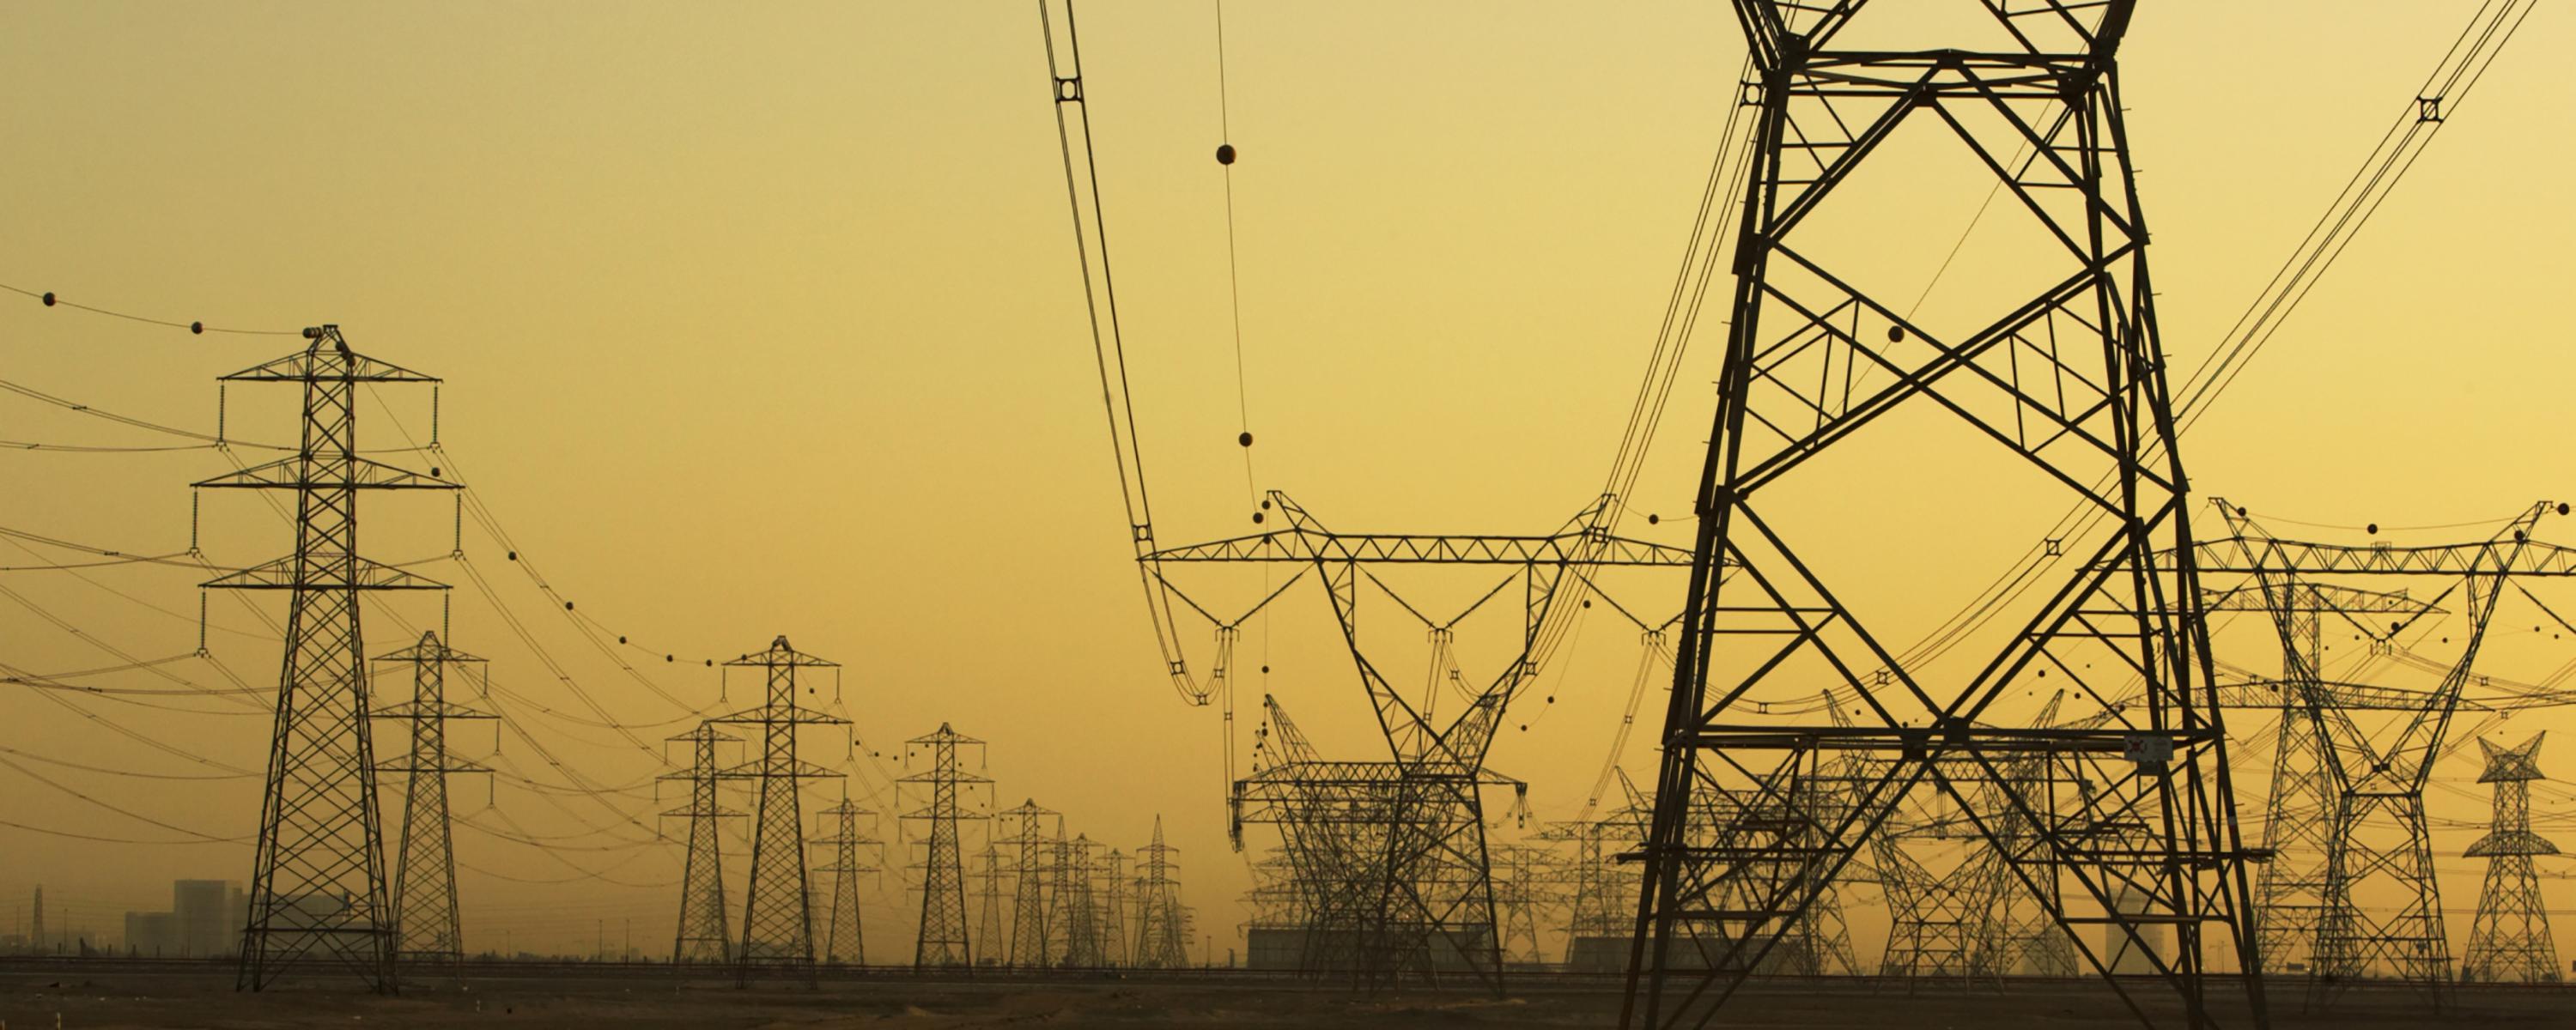 illustrative photos of power lines for Civil Engineering Technology